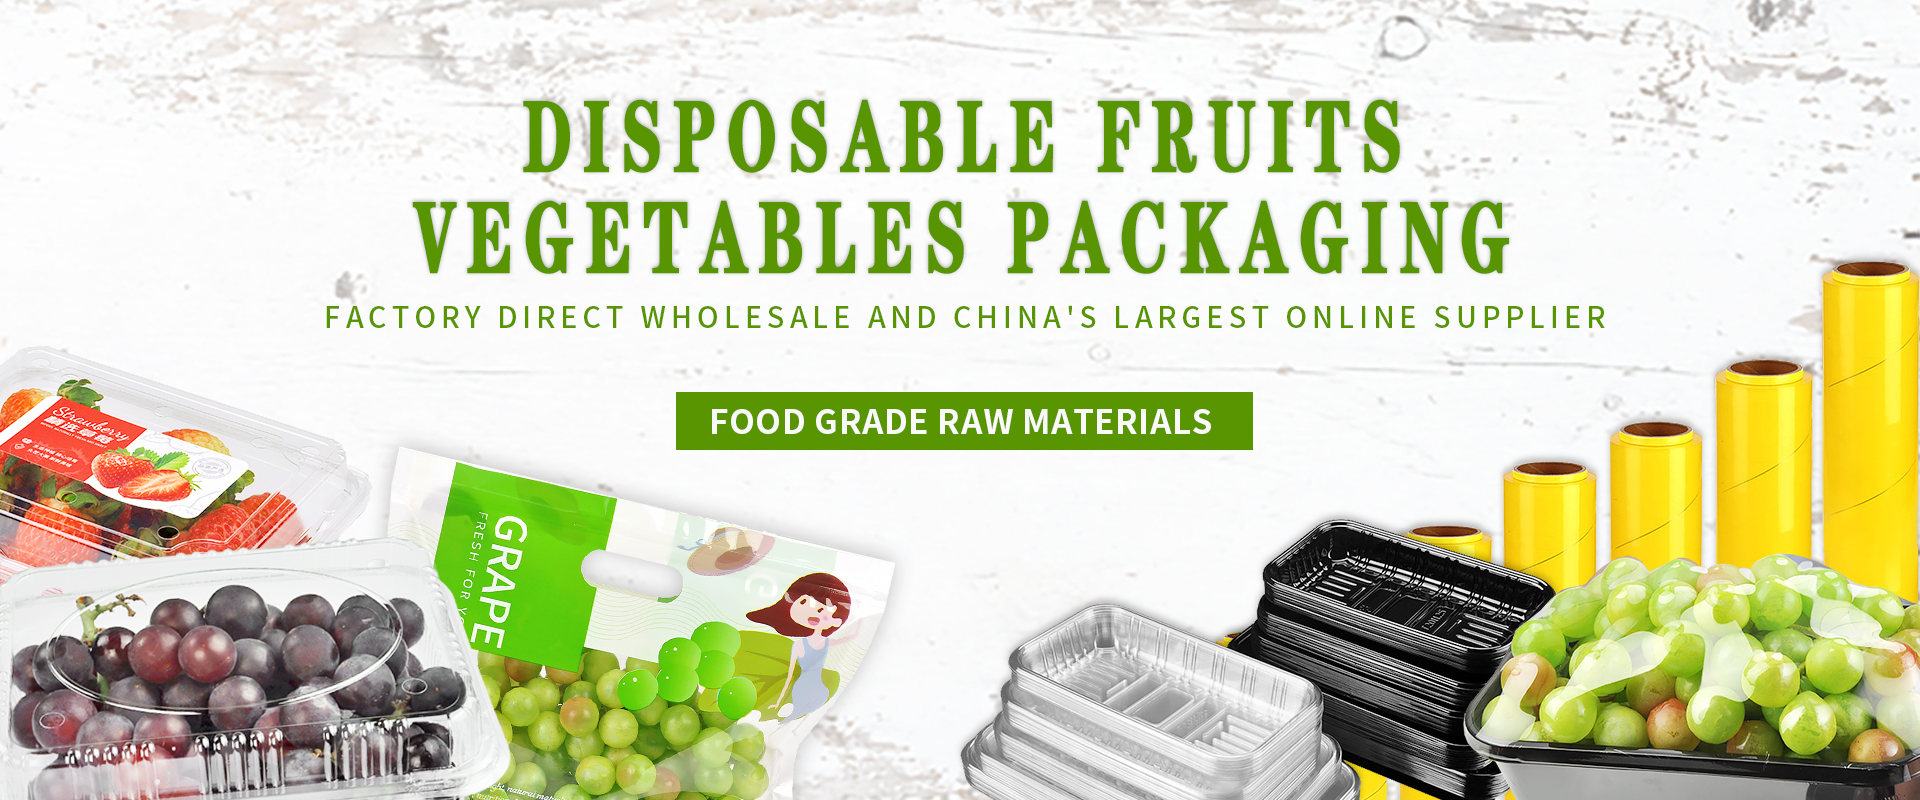 Disposable Fruits Vegetables Packaging